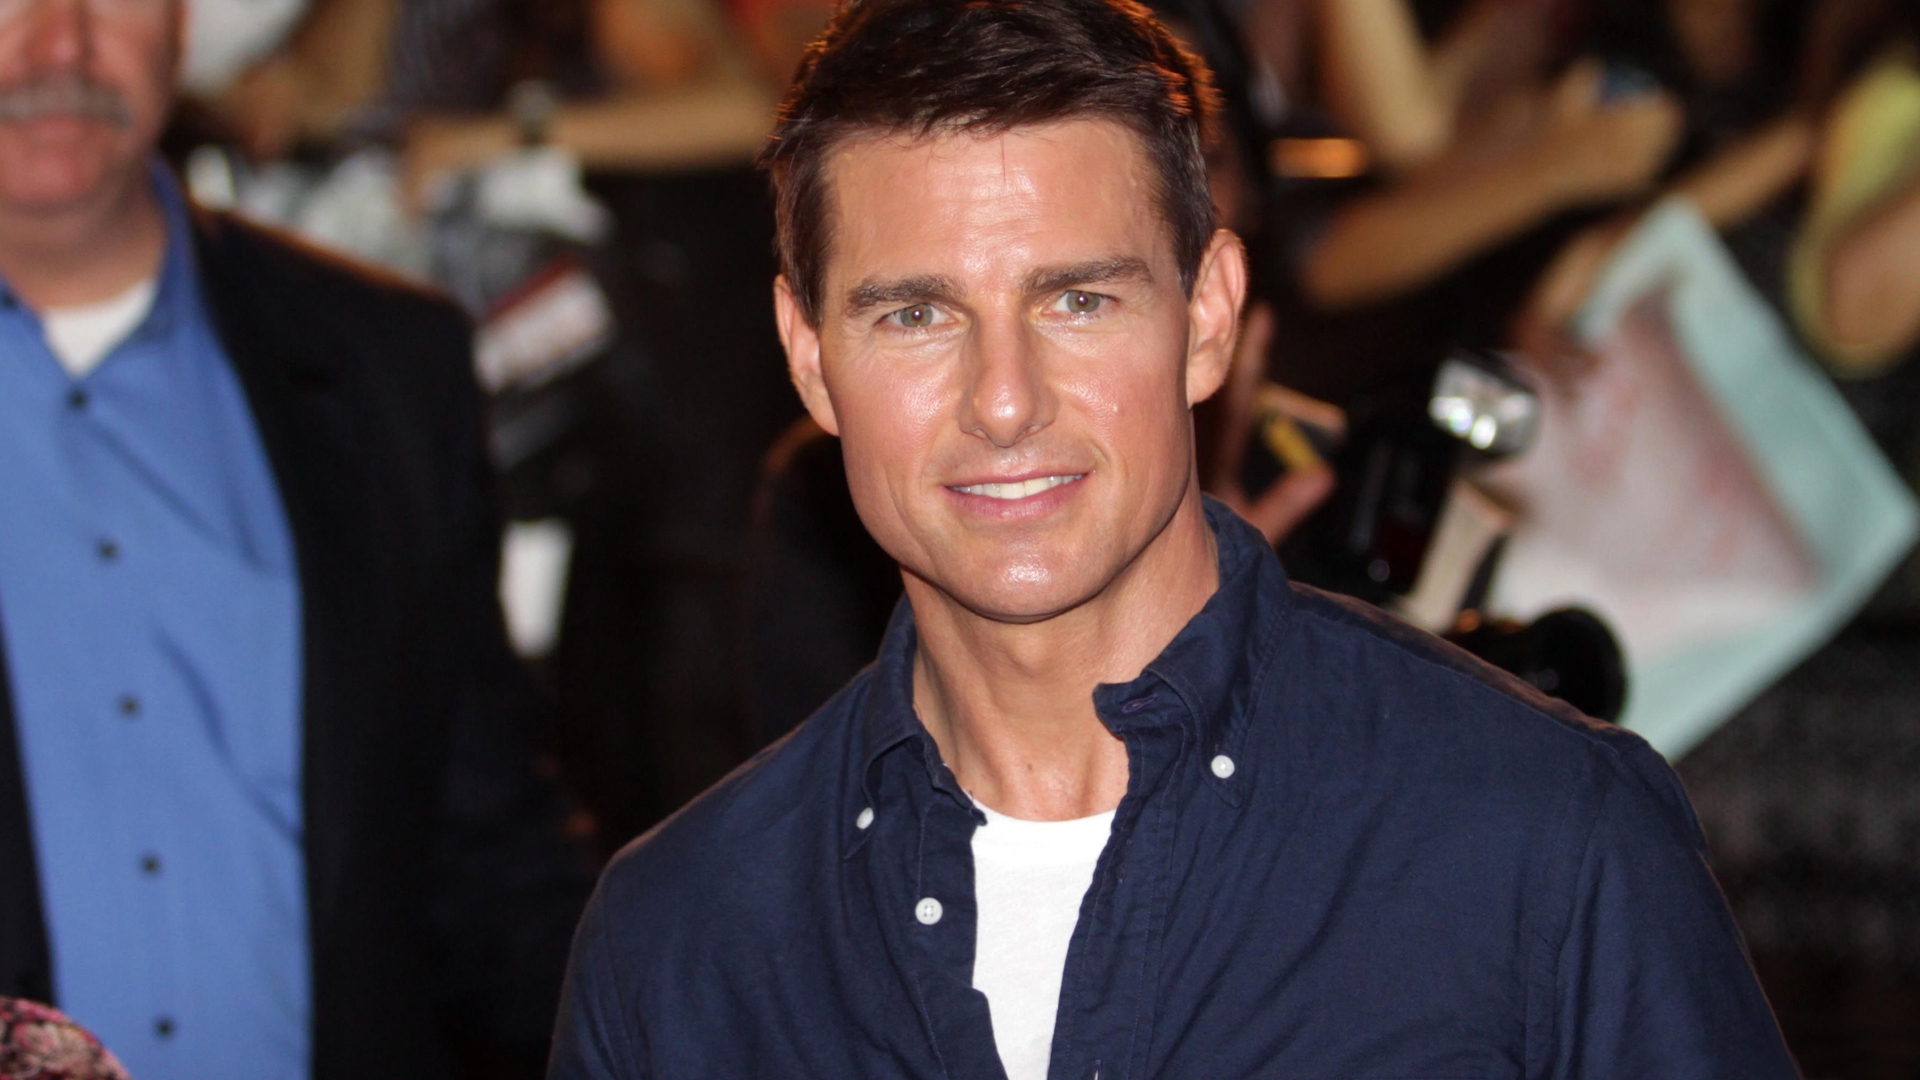 All Tom Cruise wallpapers.